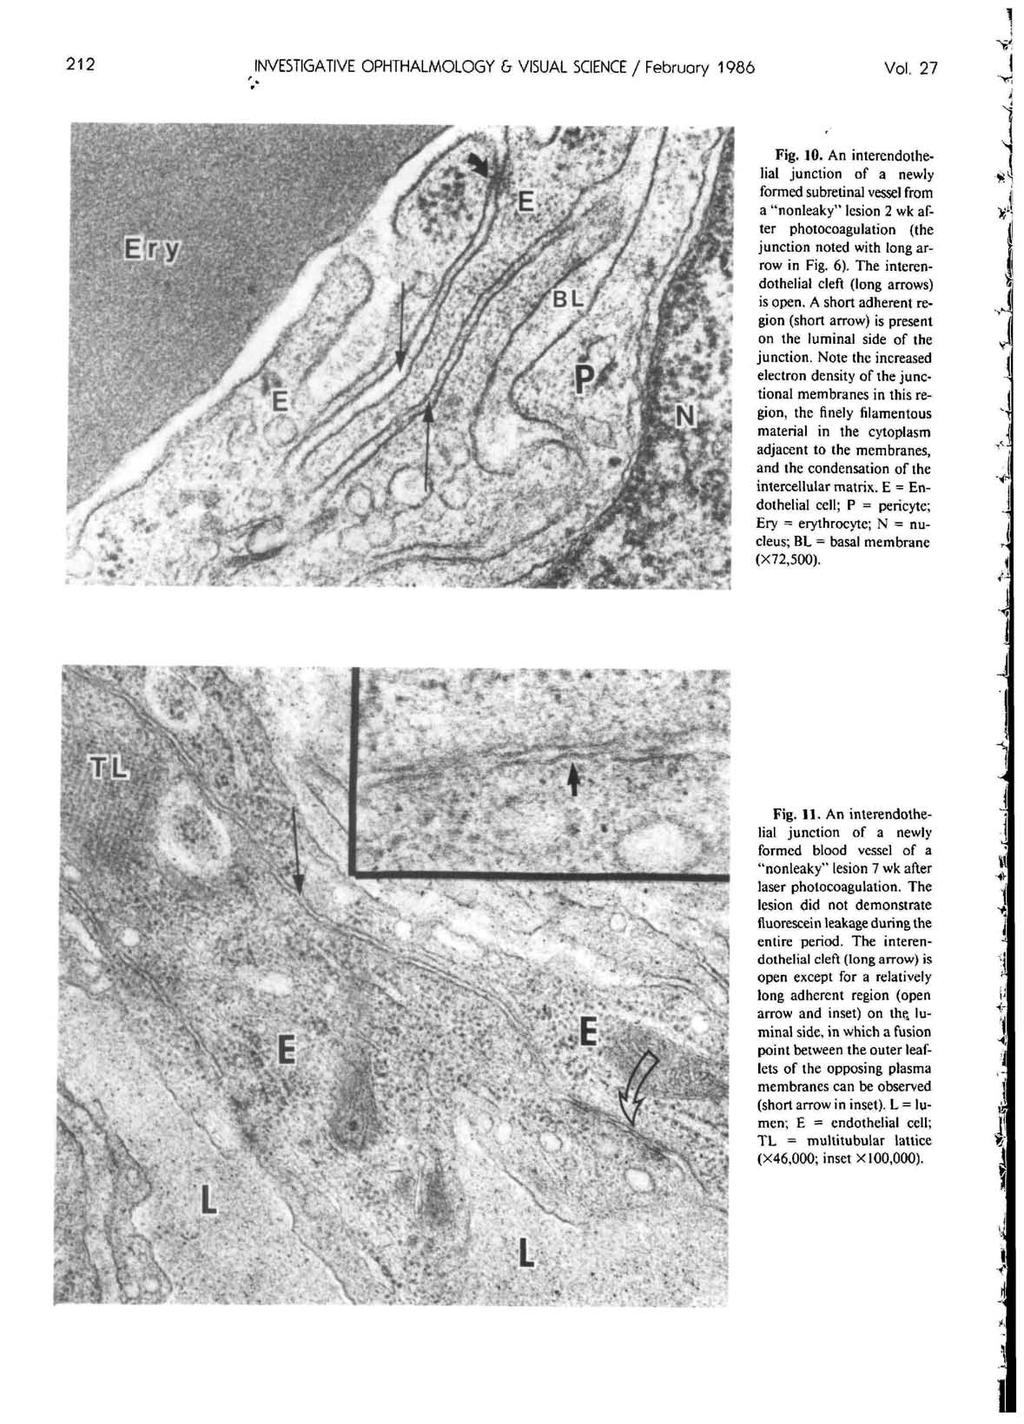 212 INVESTIGATIVE OPHTHALMOLOGY & VISUAL SCIENCE / Februory 1986 Vol. 27 Fig, 10.